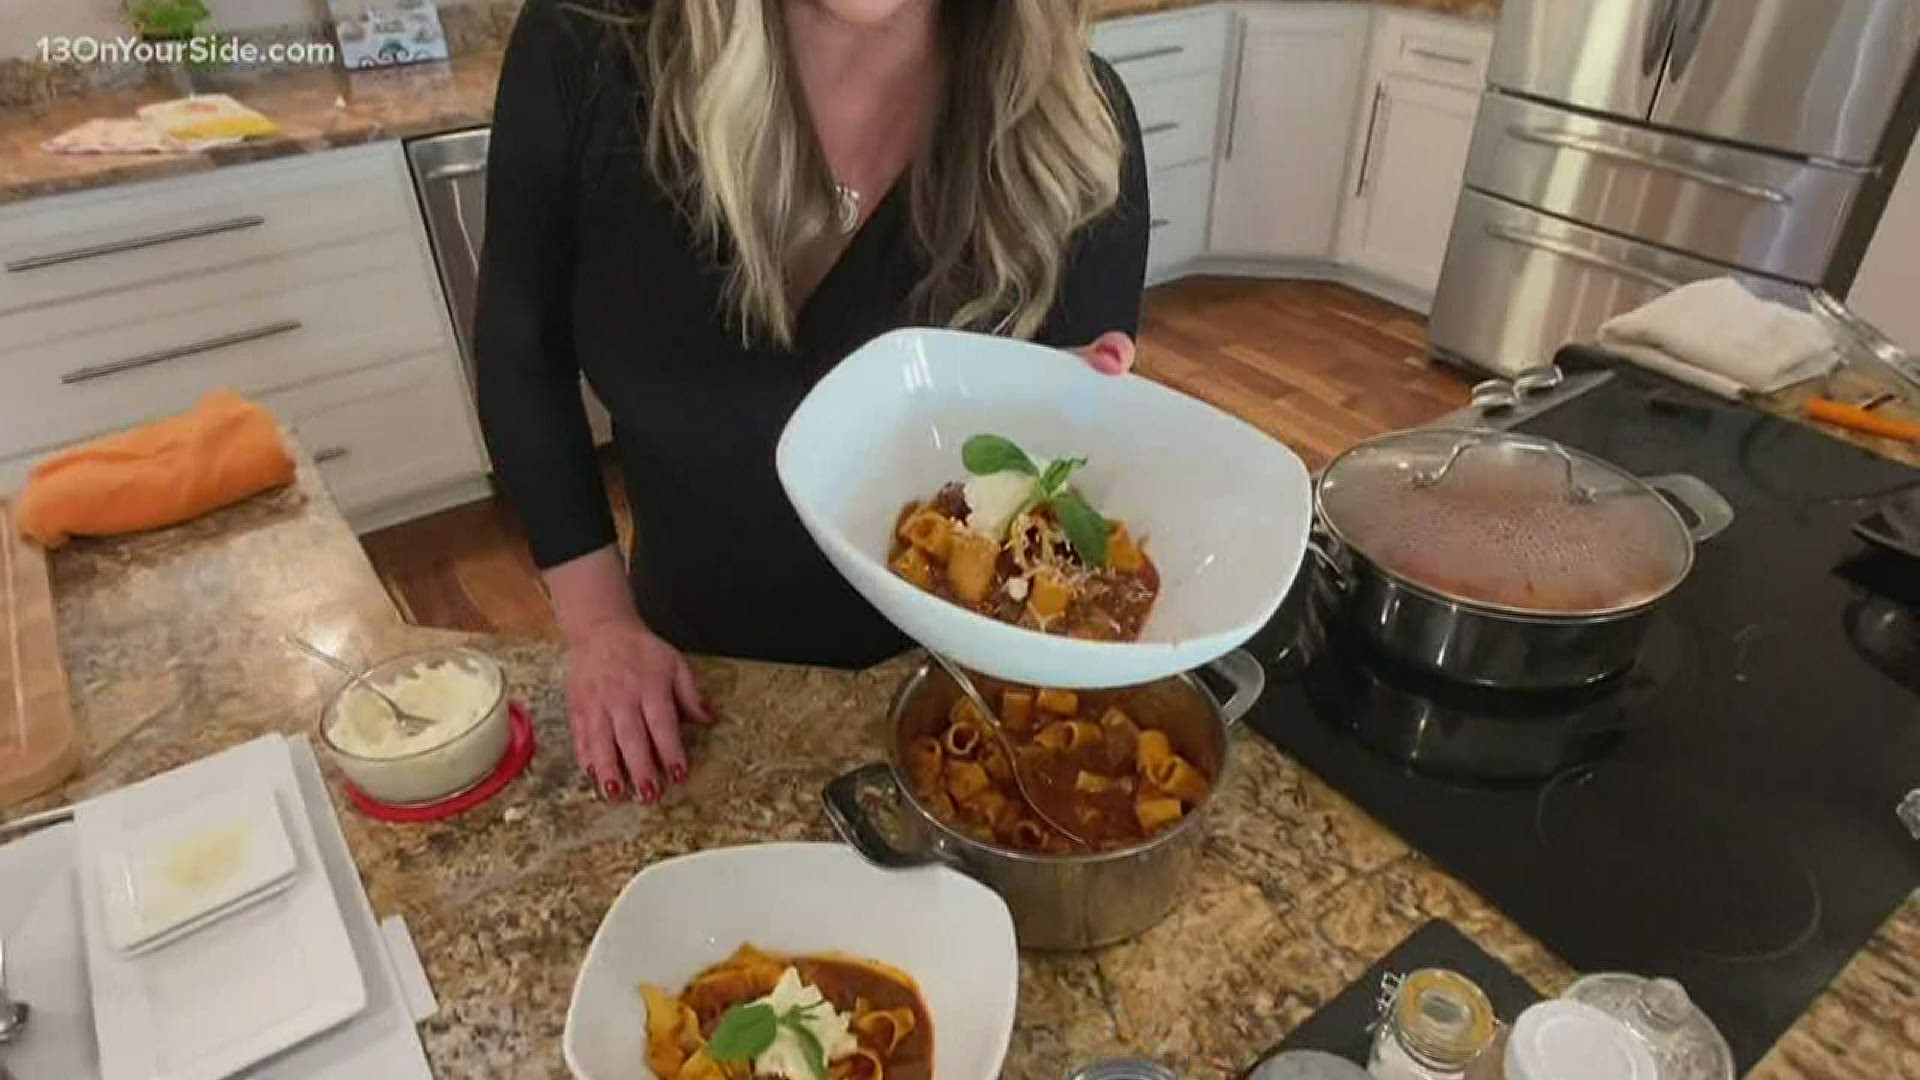 It's time for something new! Cookbook author Gina Ferwerda shares a recipe that's perfect for dinner!